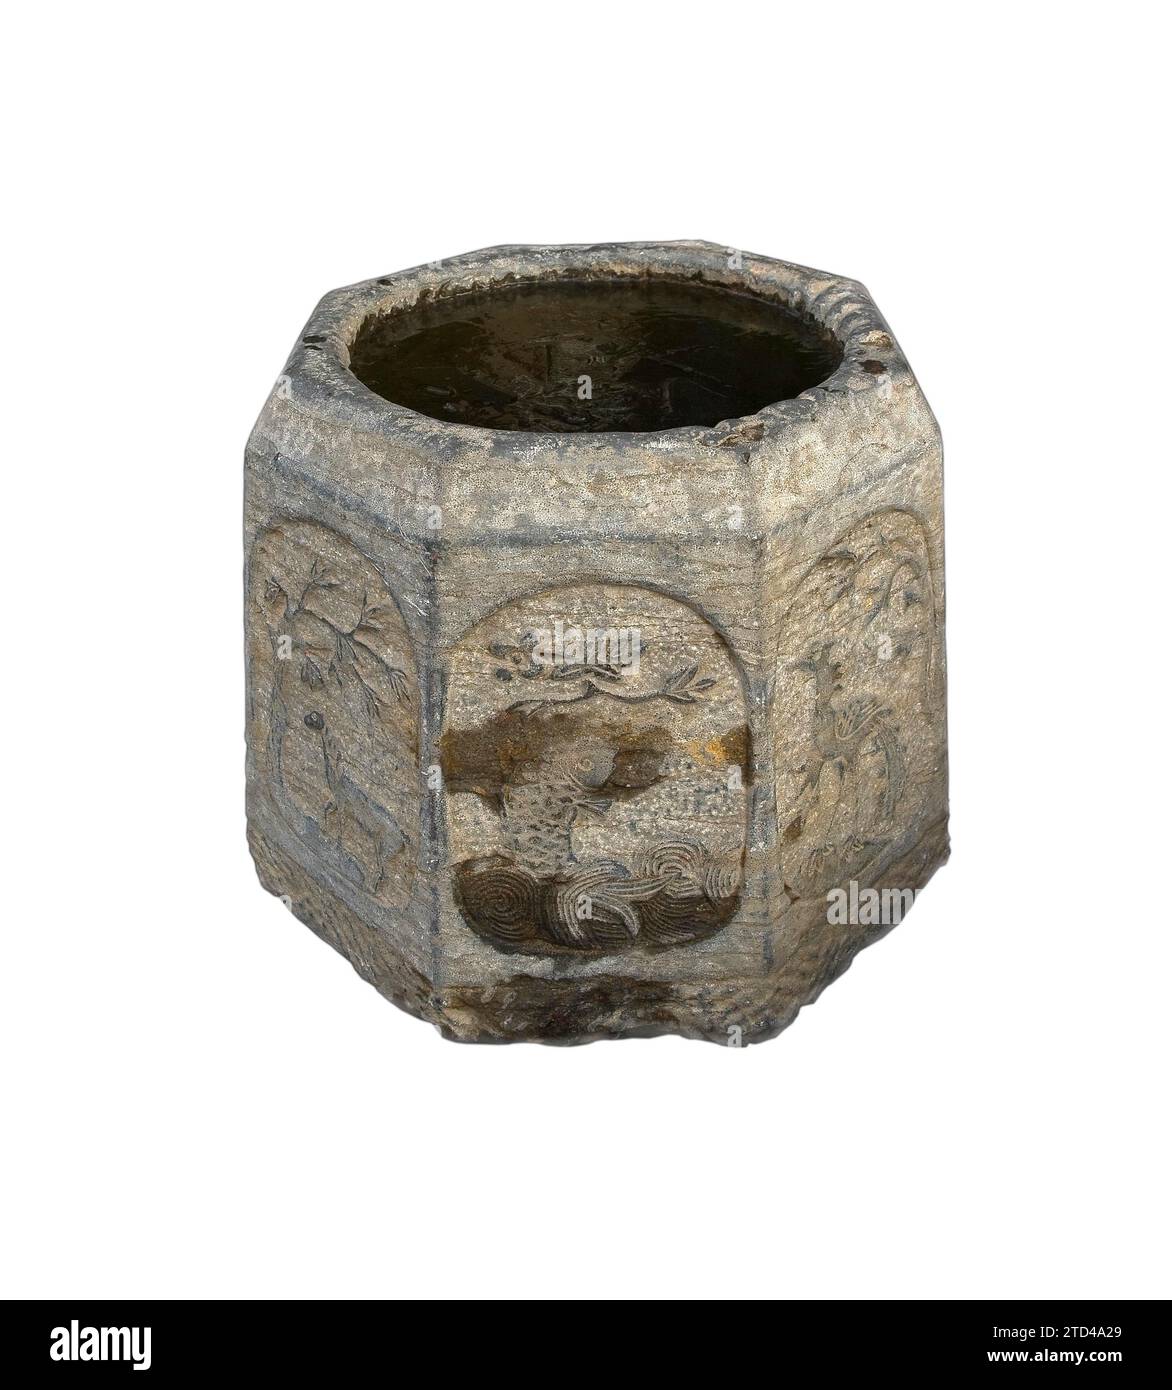 Ancient stone bucket finely carved with iced water over white backgroungd Stock Photo